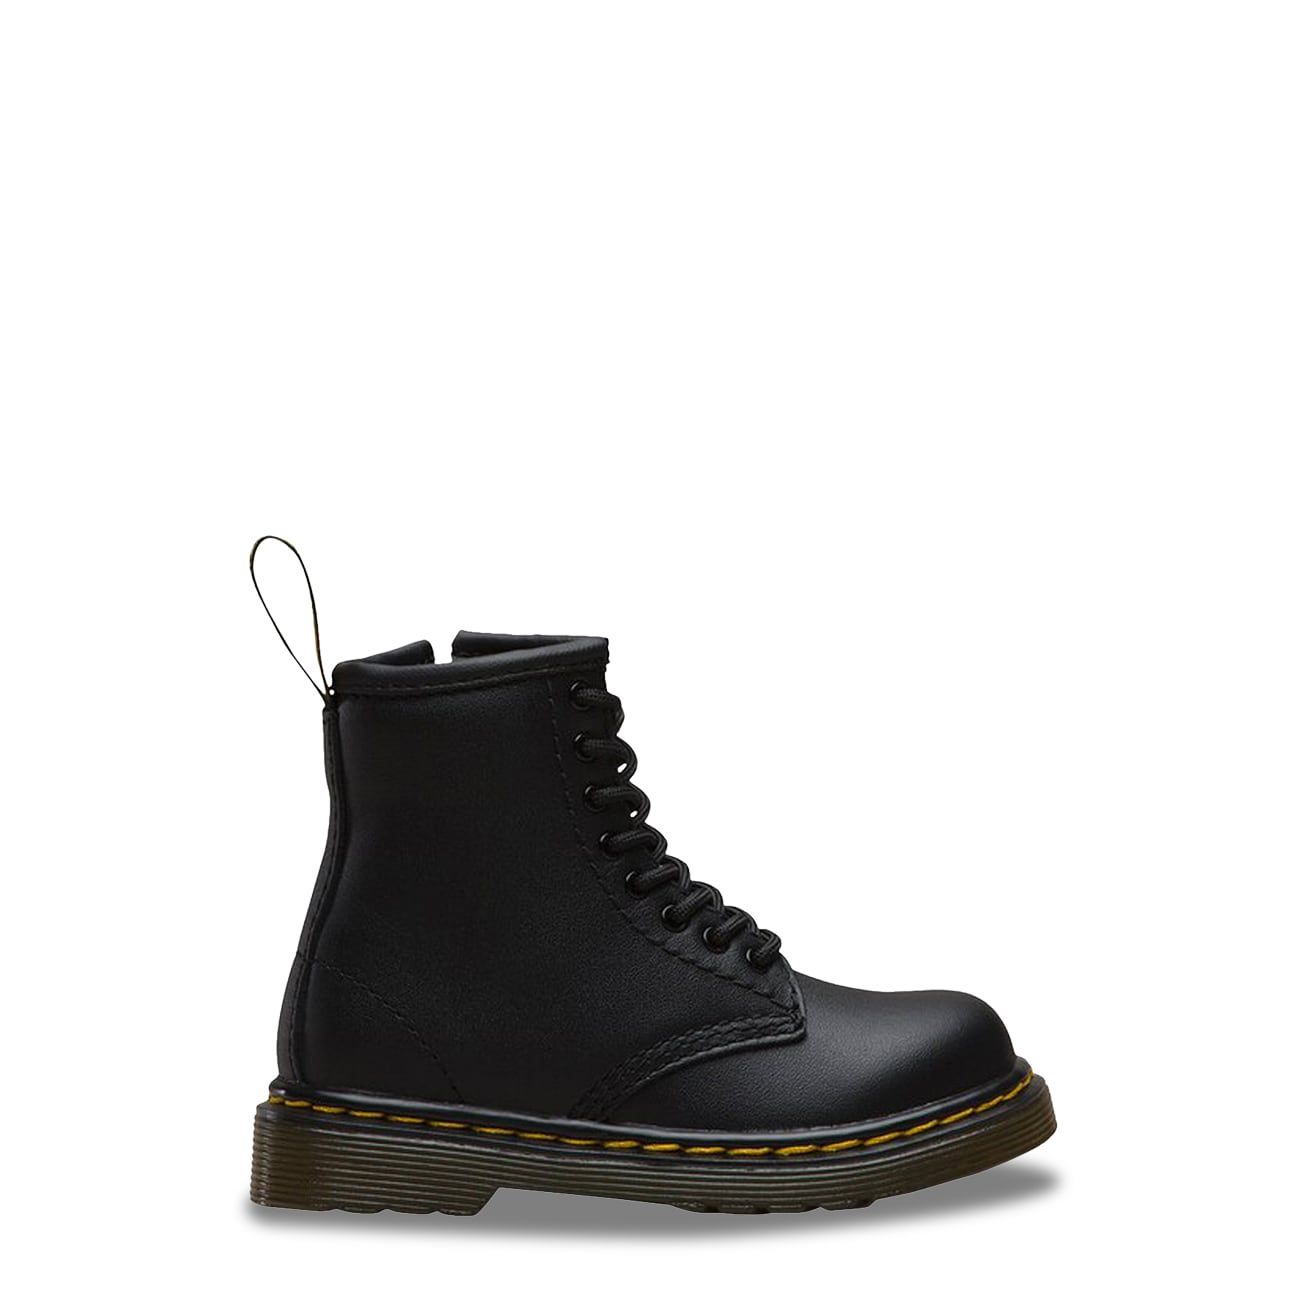 Dr. Martens UK Sizing Toddler Boys' Casual Boot | The Shoe Company